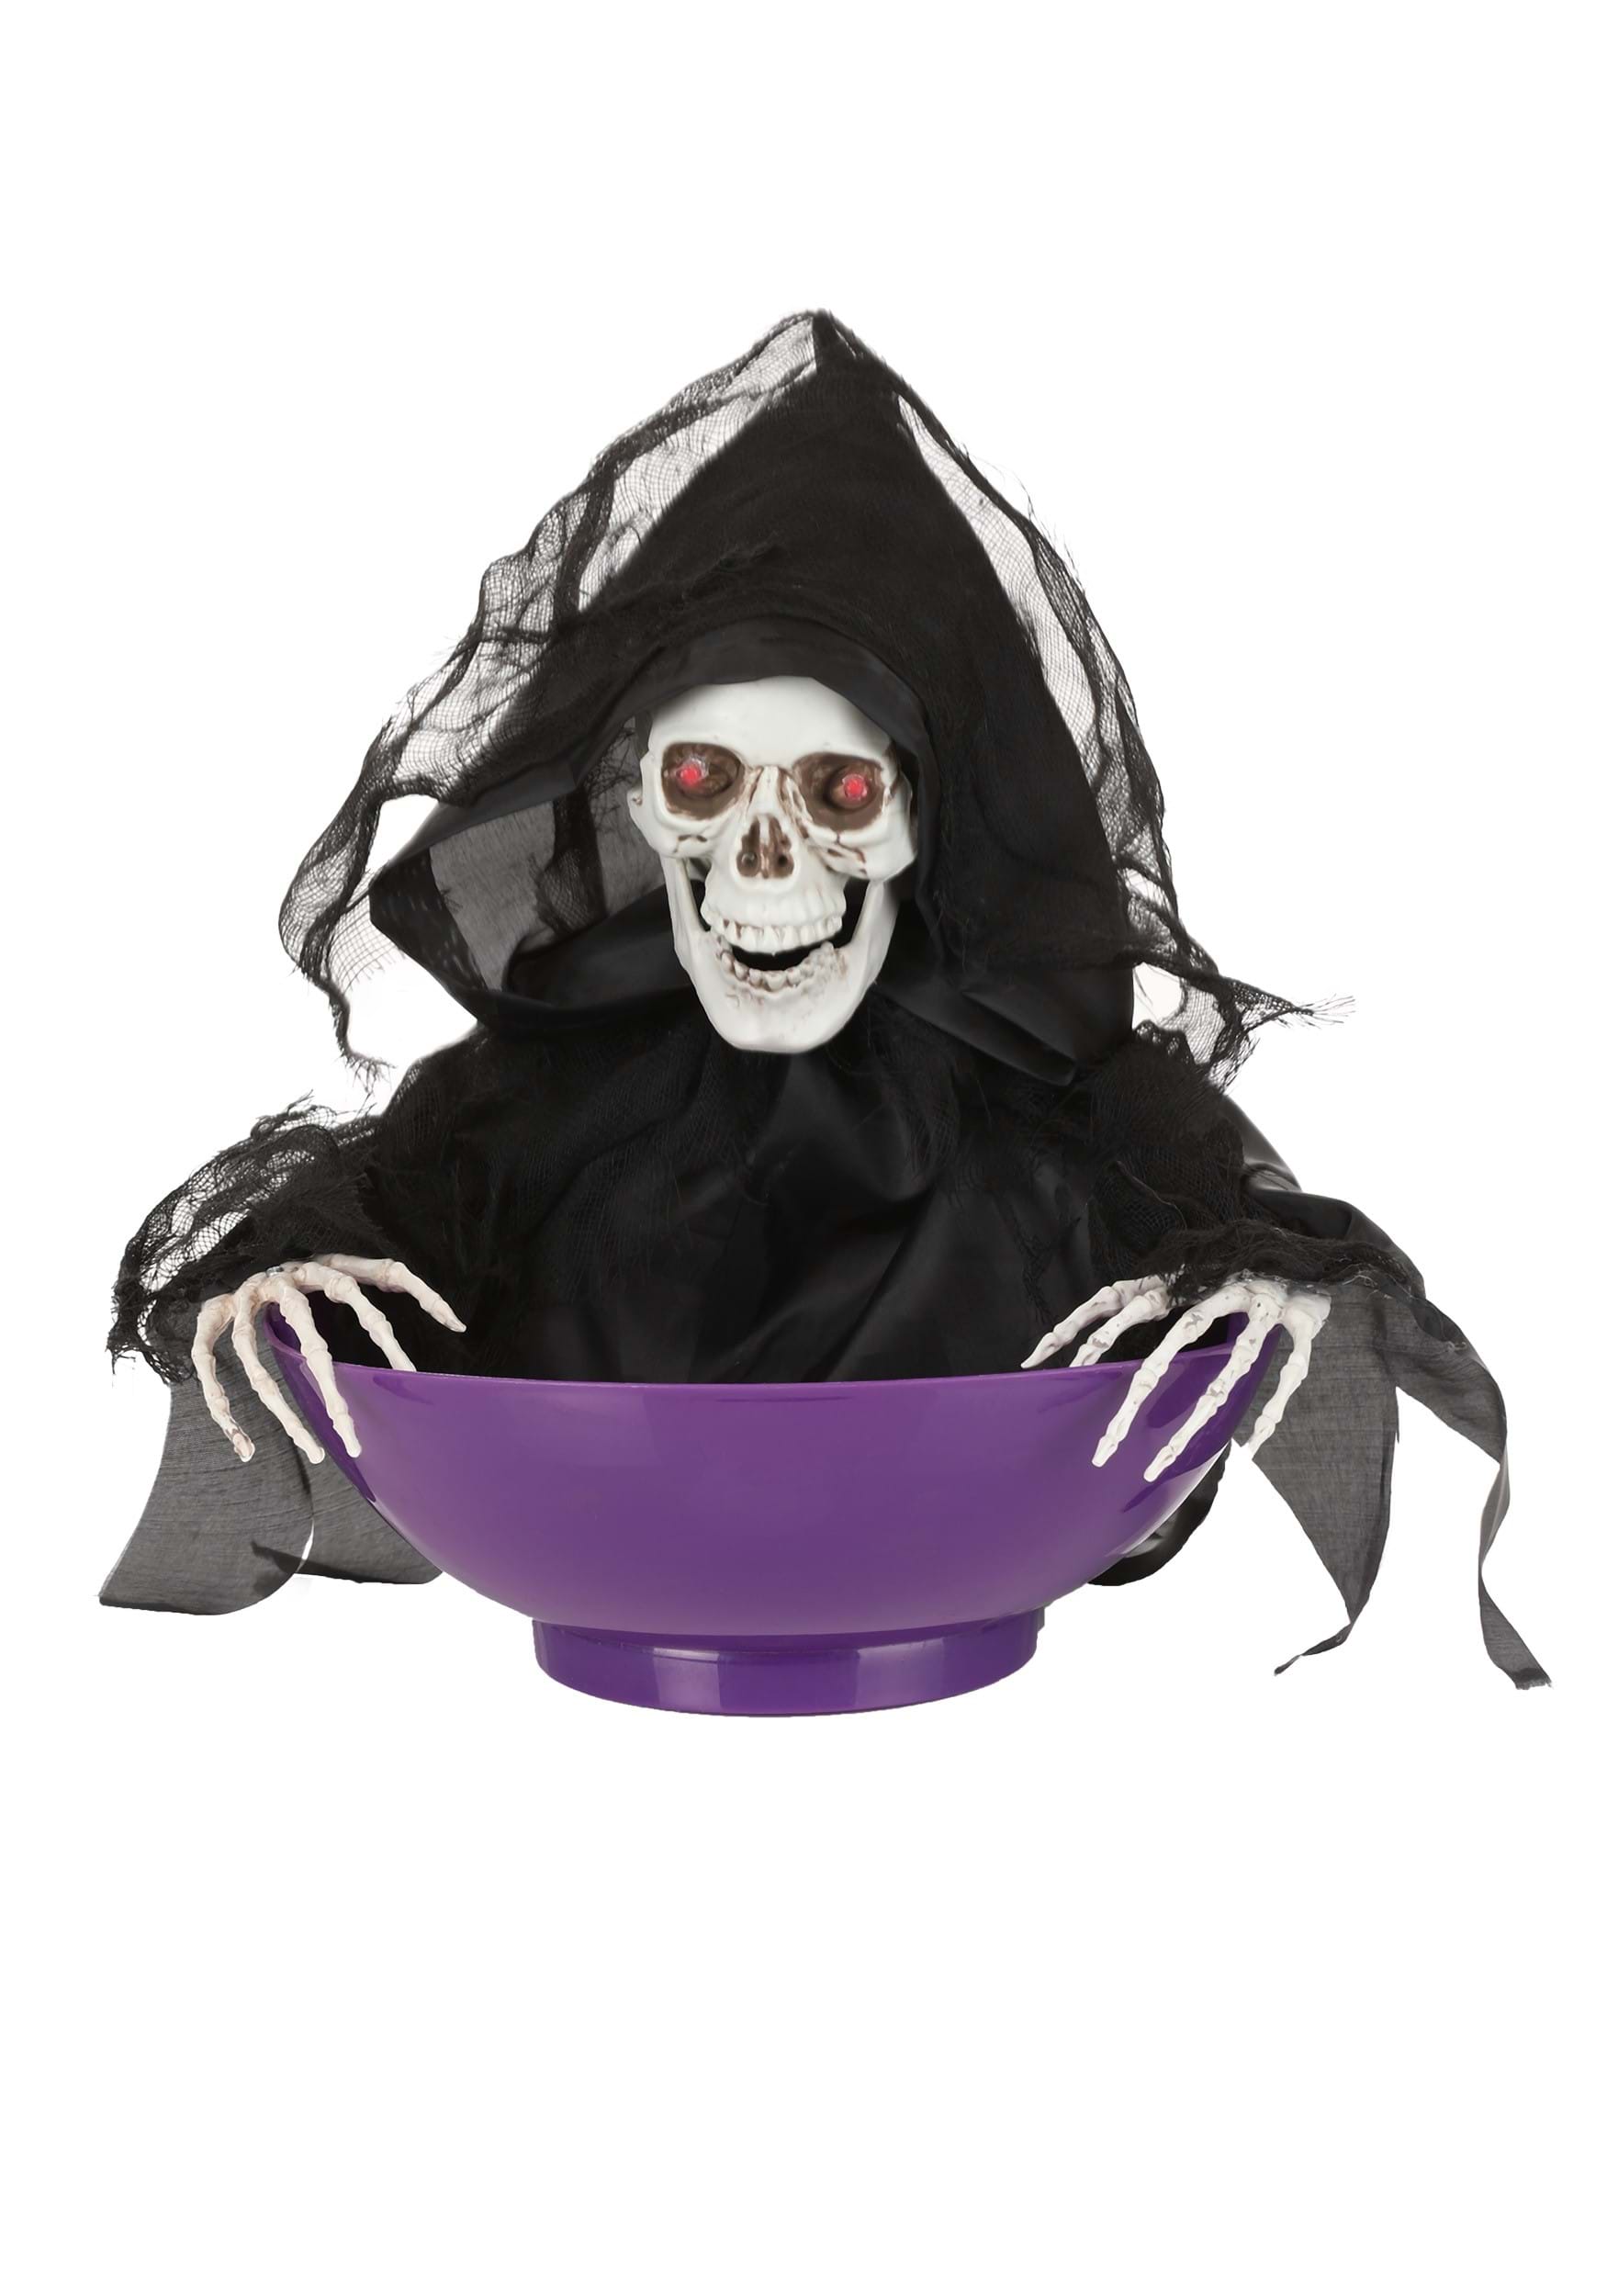 Animated Candy Bowl With Shaking Reaper Halloween Decoration.